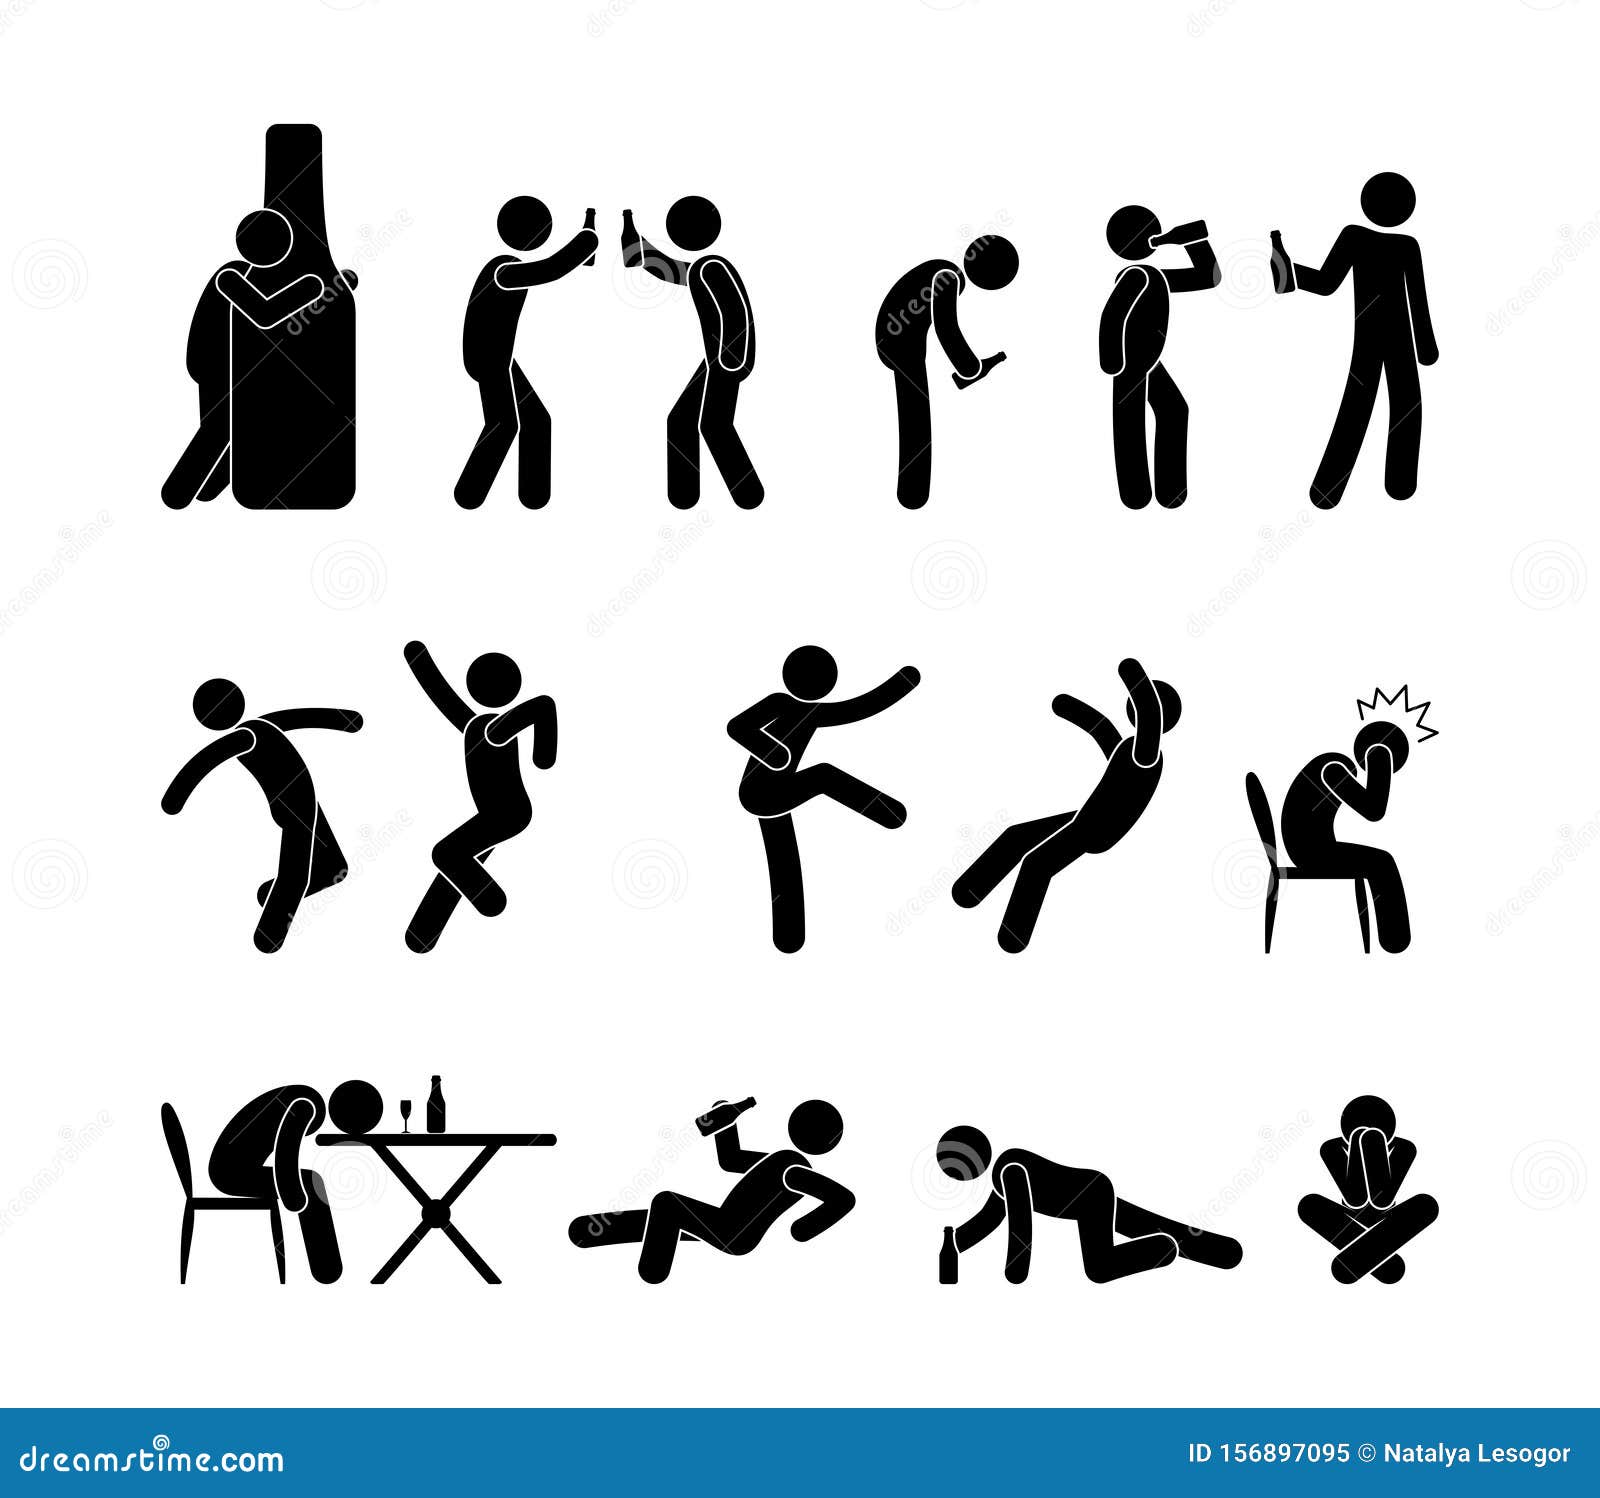 drunk people in different situations. cocktail party people drink alcohol. sticks figure pictogram alcoho